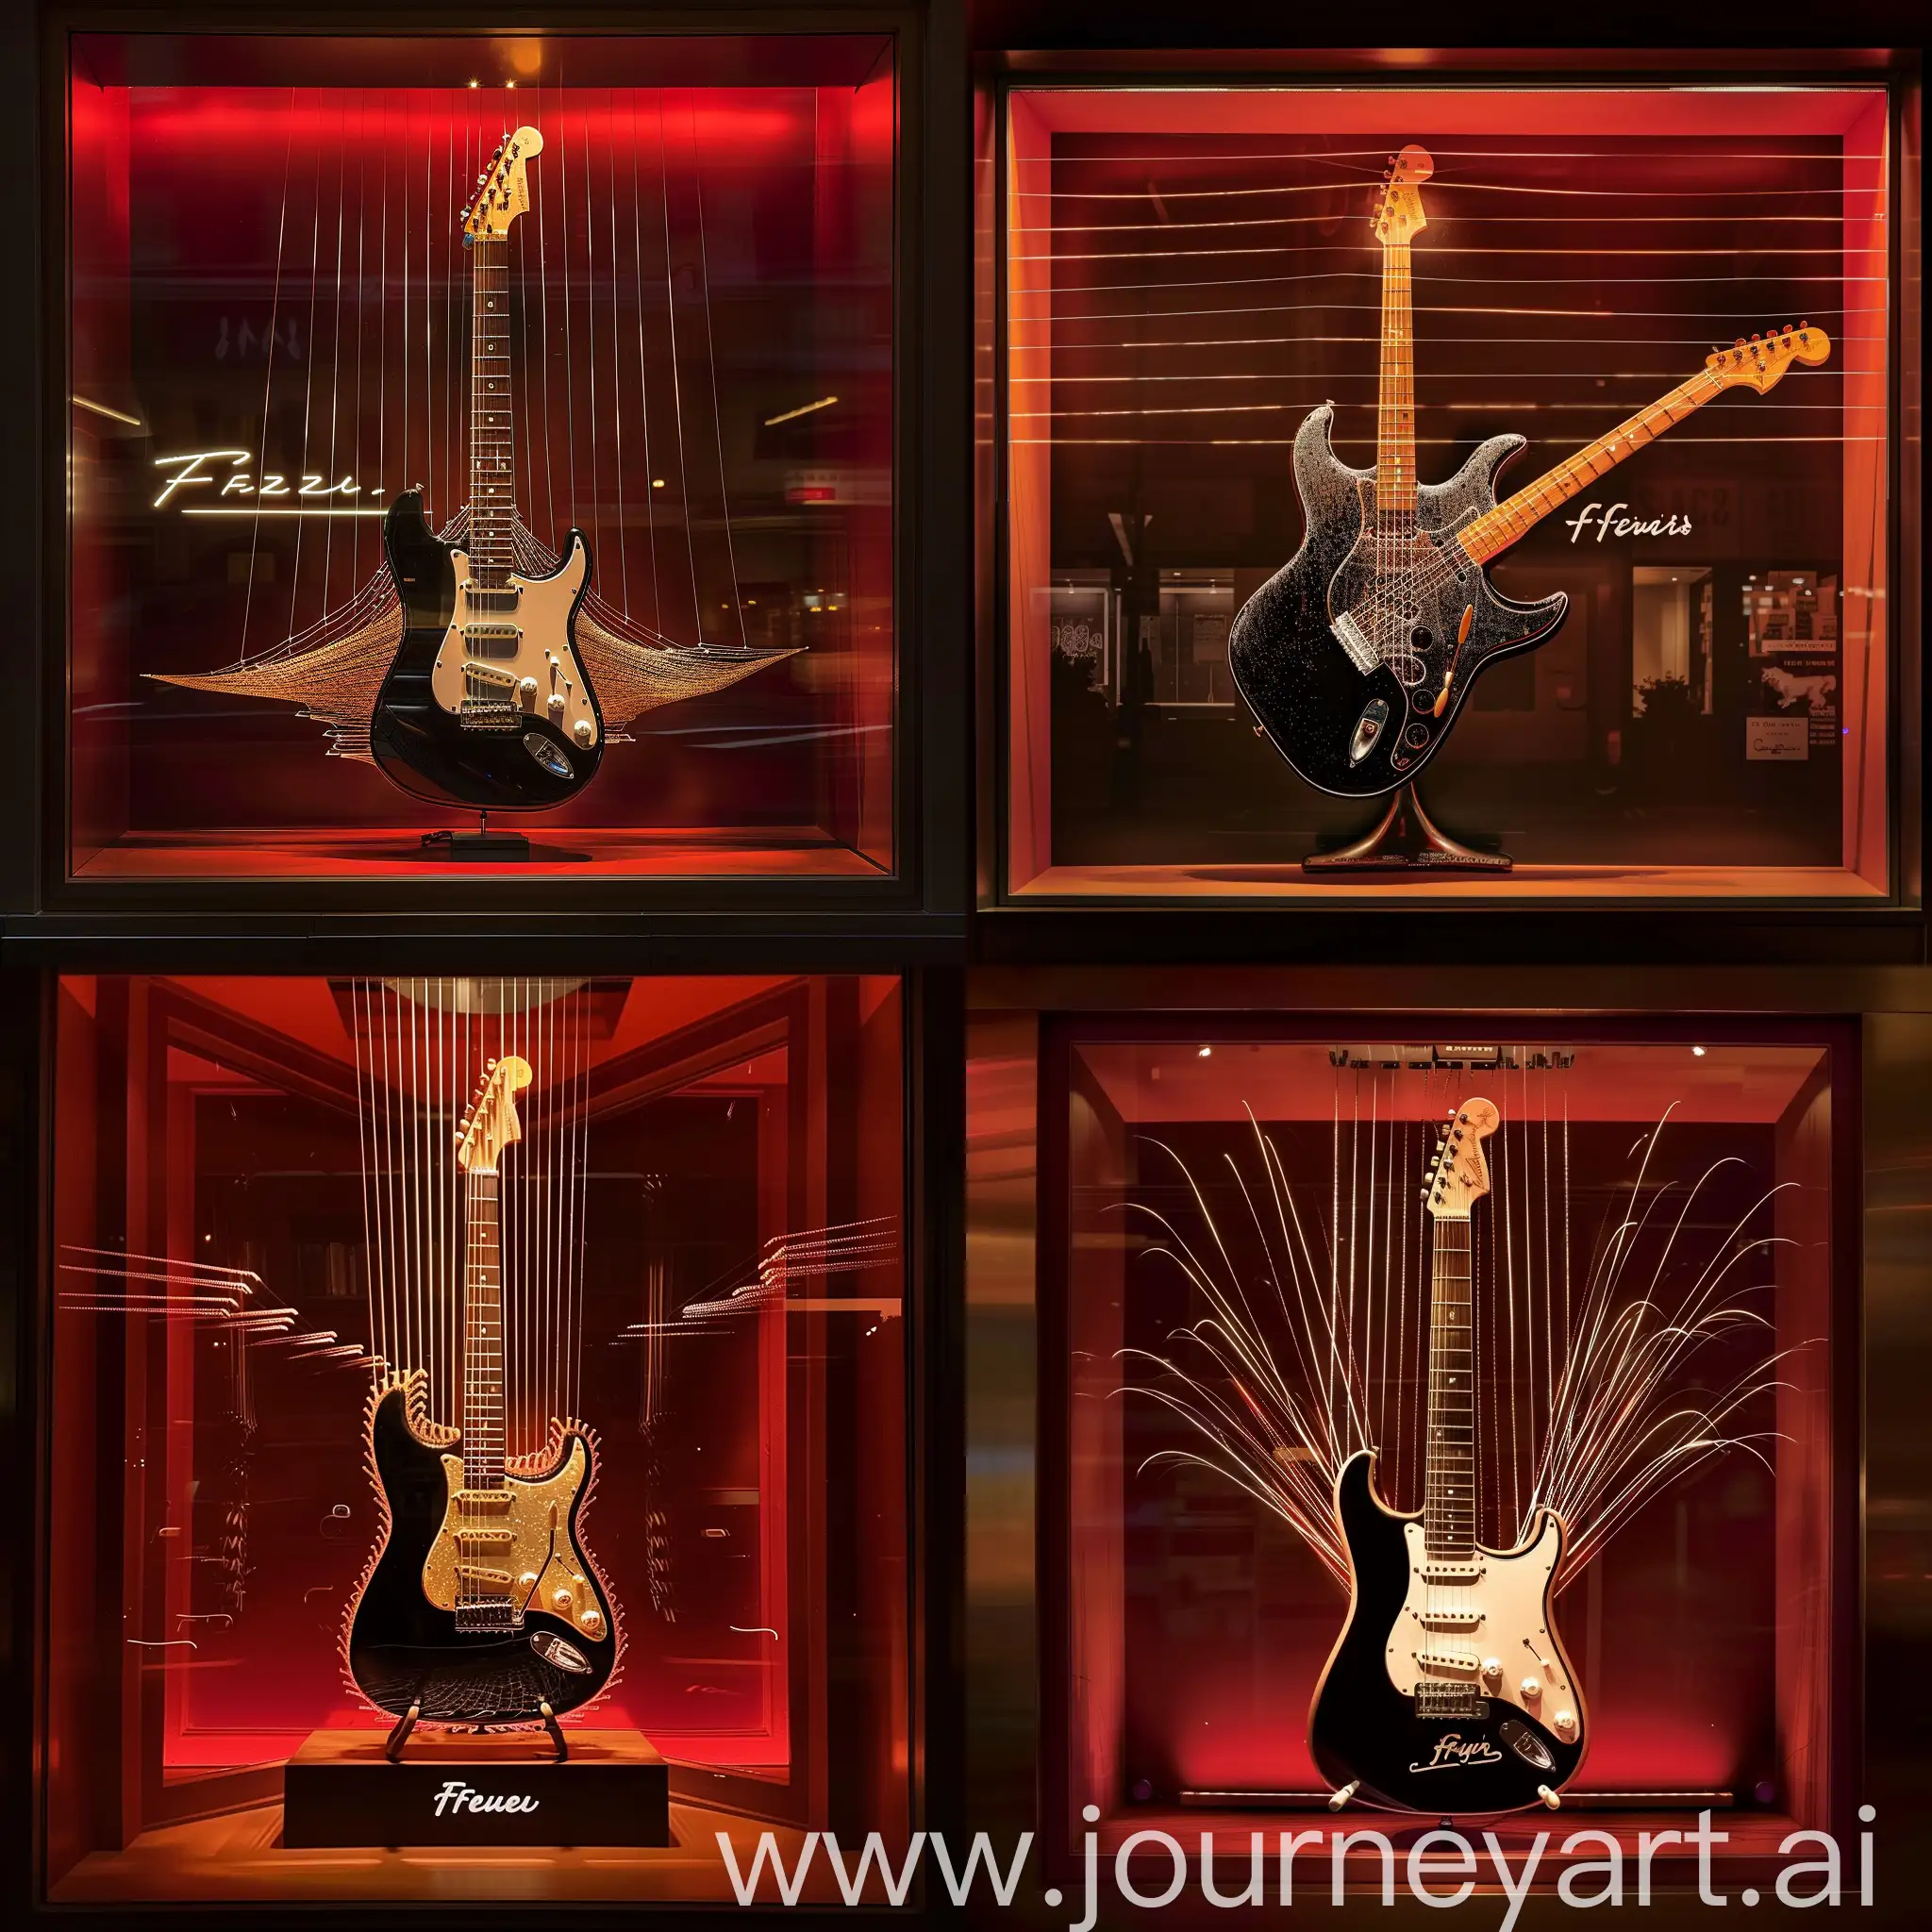 Solo-Black-and-White-Electric-Guitar-in-Fender-Guitars-Shop-Window